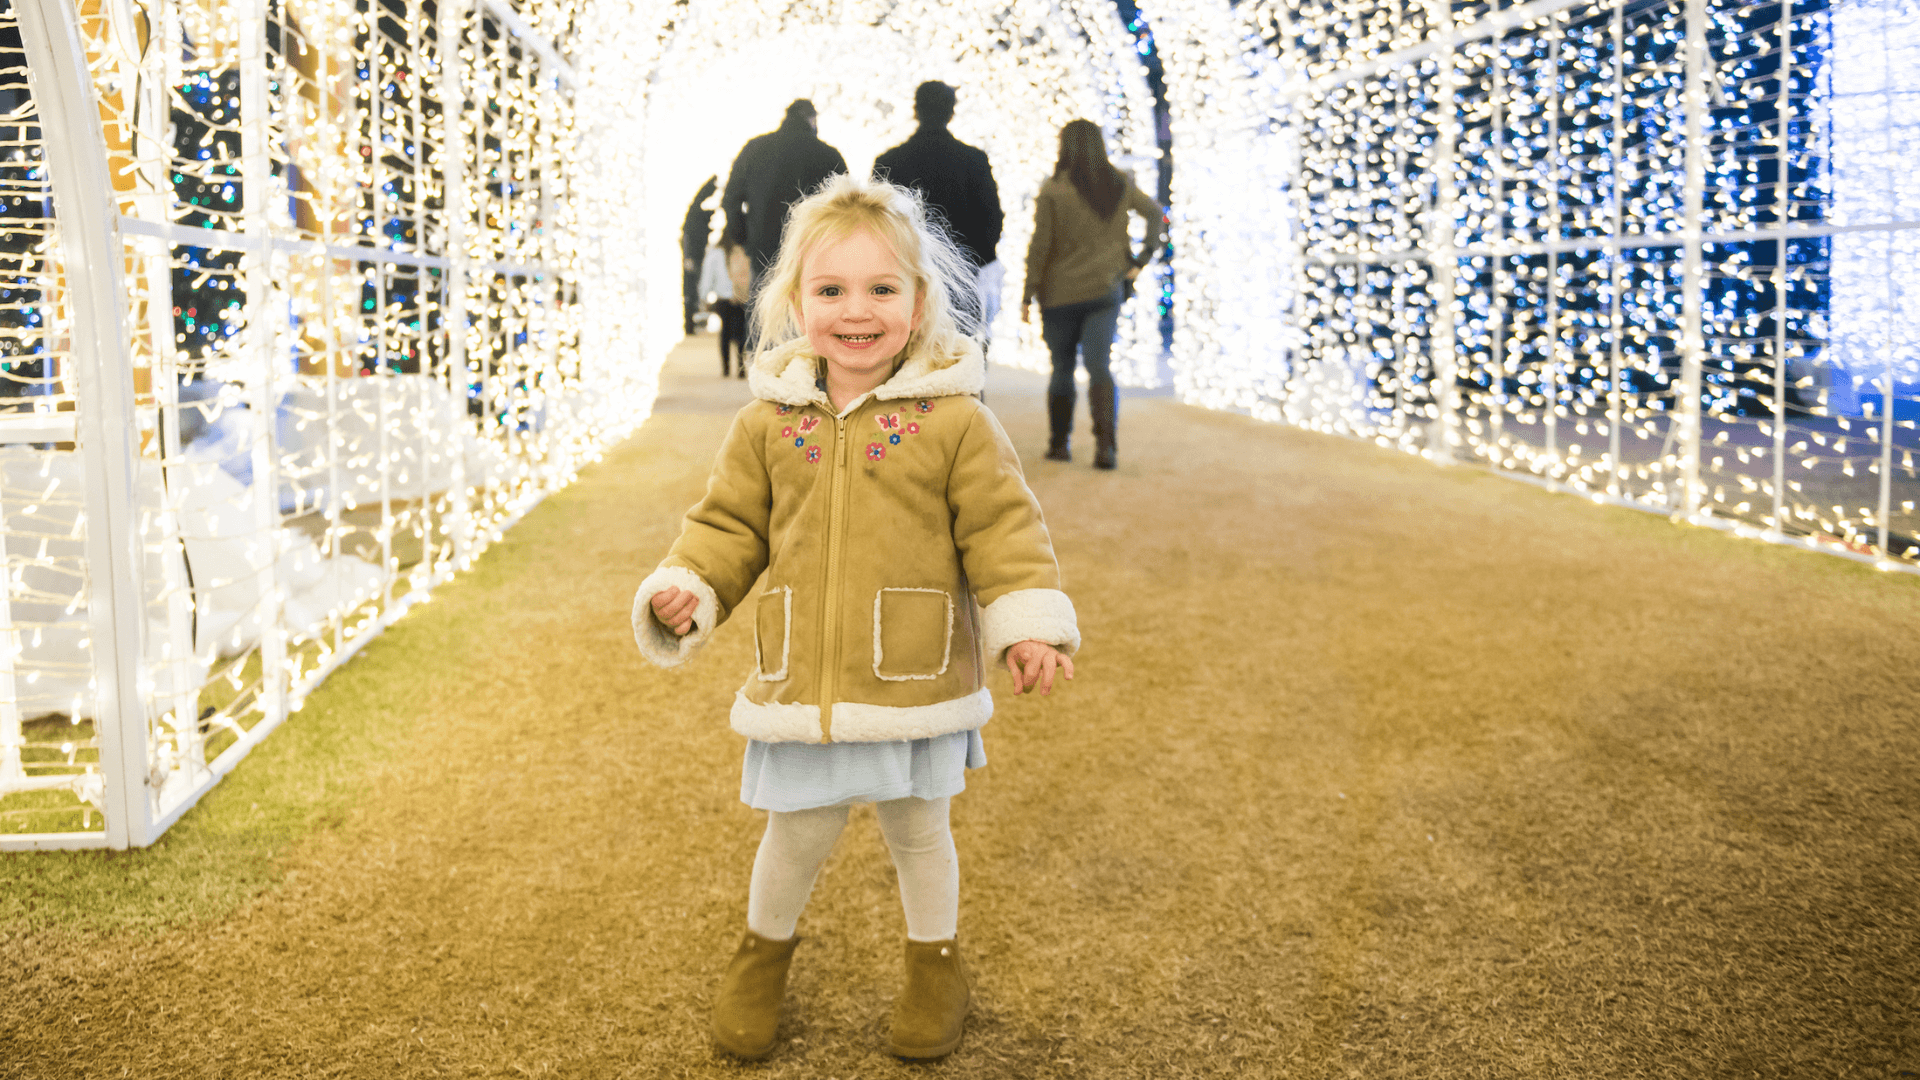 One Mom’s Guide to Making Enchant Christmas a Breeze with Young Kids